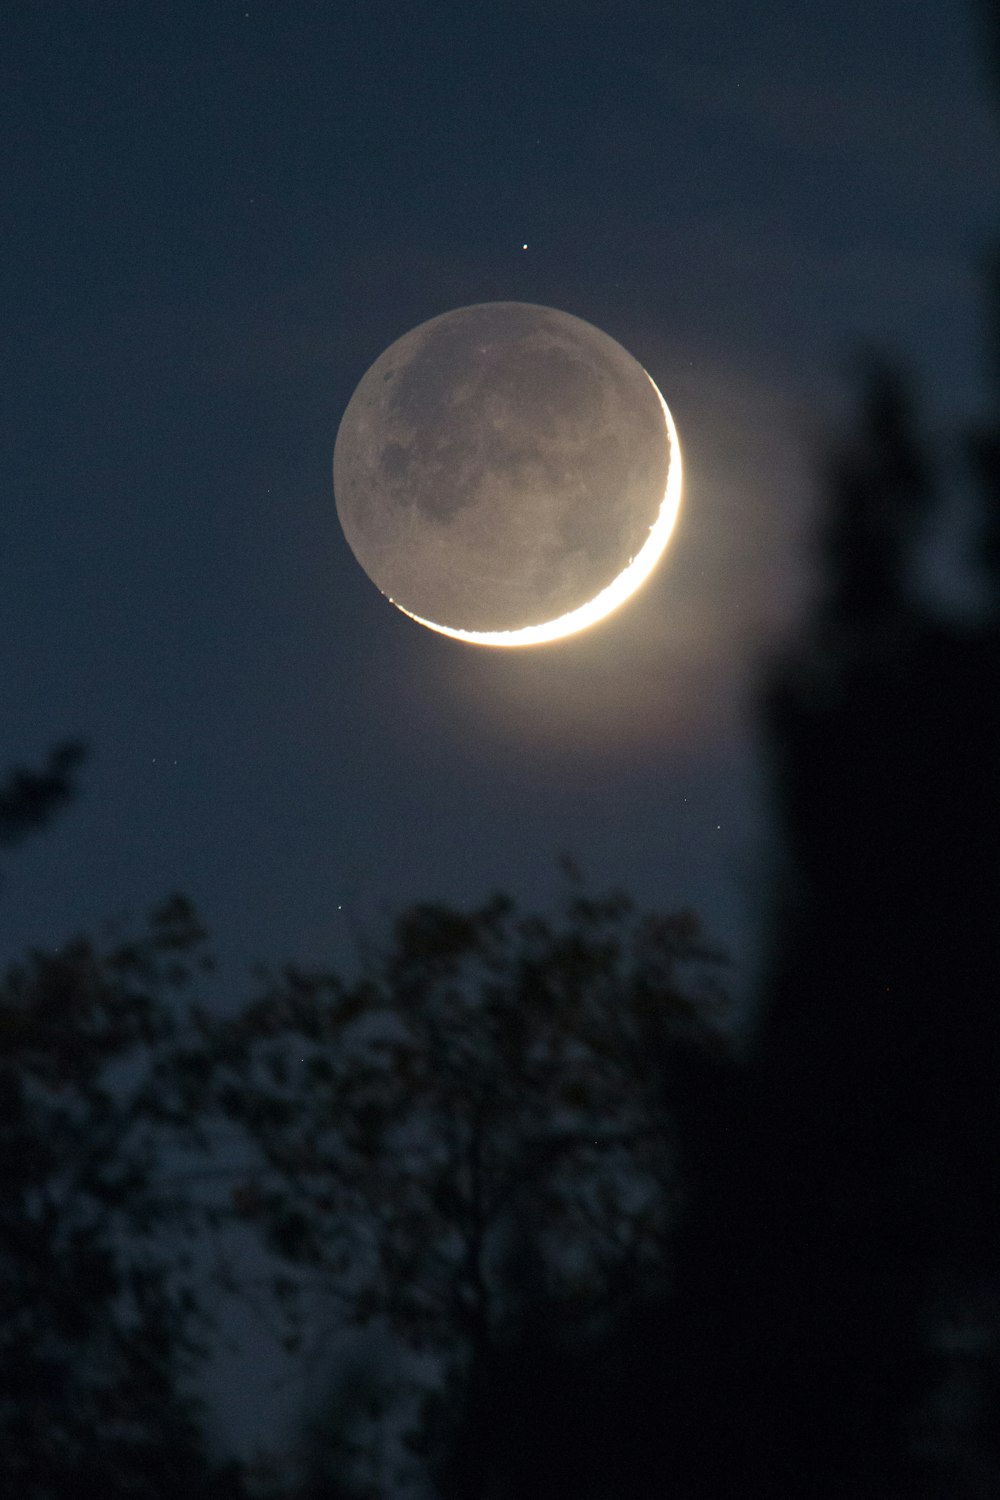 a crescent moon is seen in the night sky